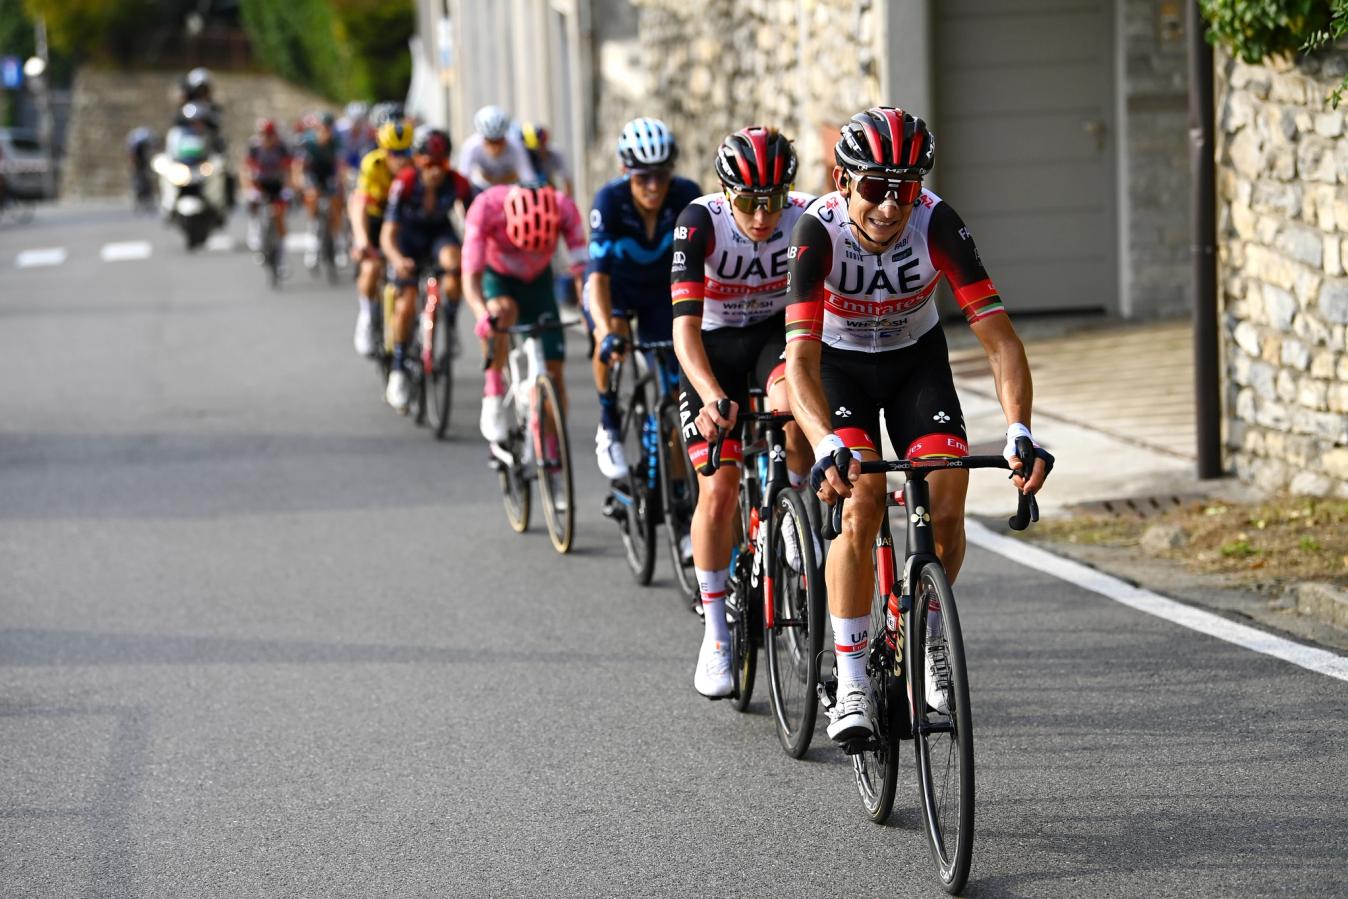 Helping Tadej Pogačar to his 2022 Il Lombardia victory, Davide Formolo has a contract with UAE Team Emirates until the end of 2024